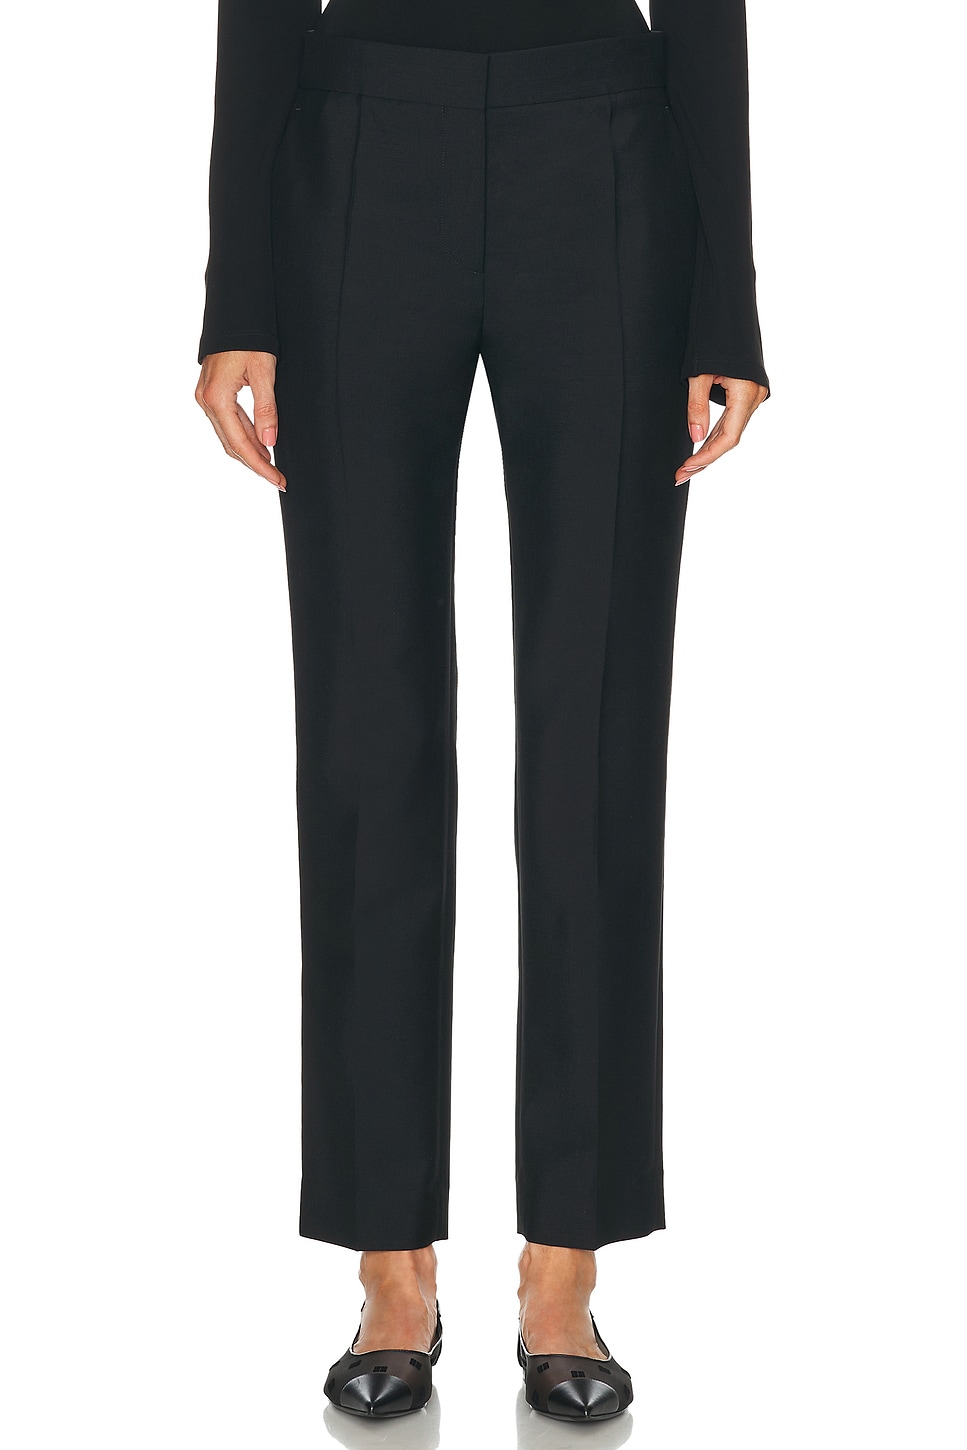 Image 1 of Givenchy Tailored Trouser in Black